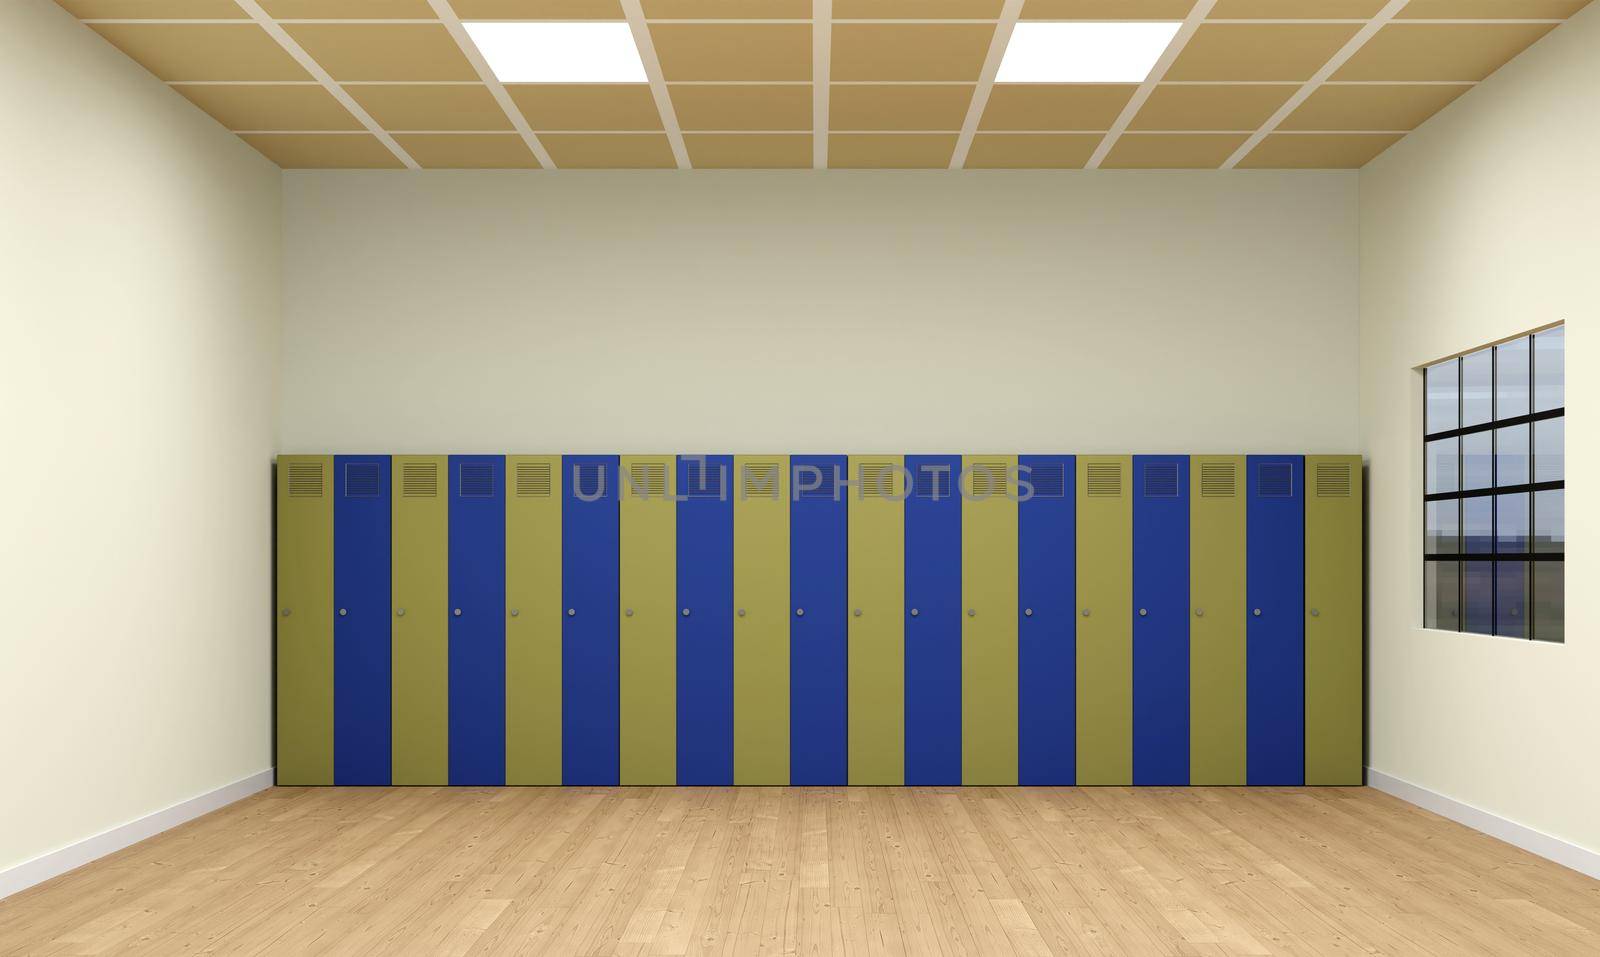 Colorful wooden numbered Student locker in modern empty classroom concept 3D rendering.